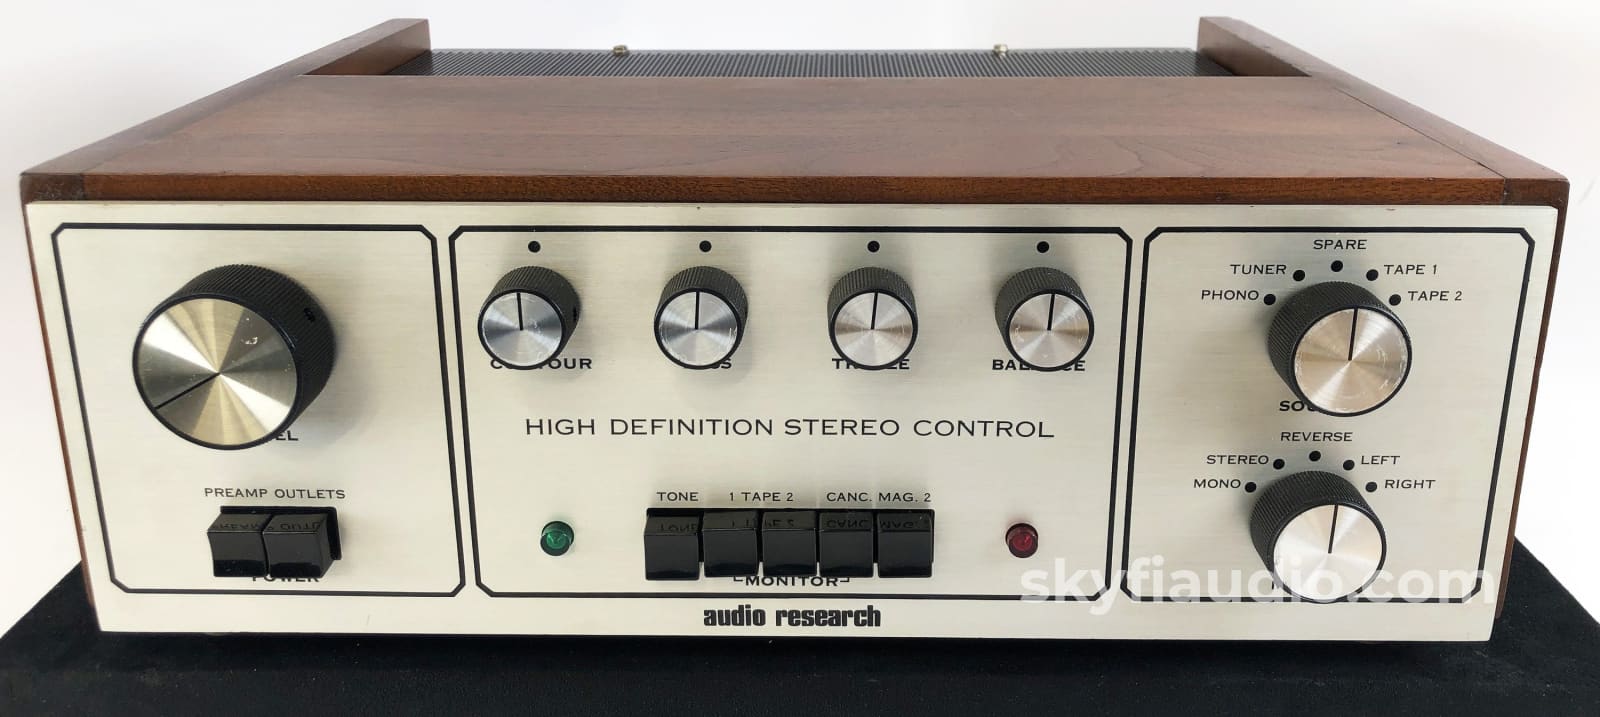 Audio Research Sp-3A-1 Vintage Tube Preamplifier - Collector Grade Restoration Reviewed By The